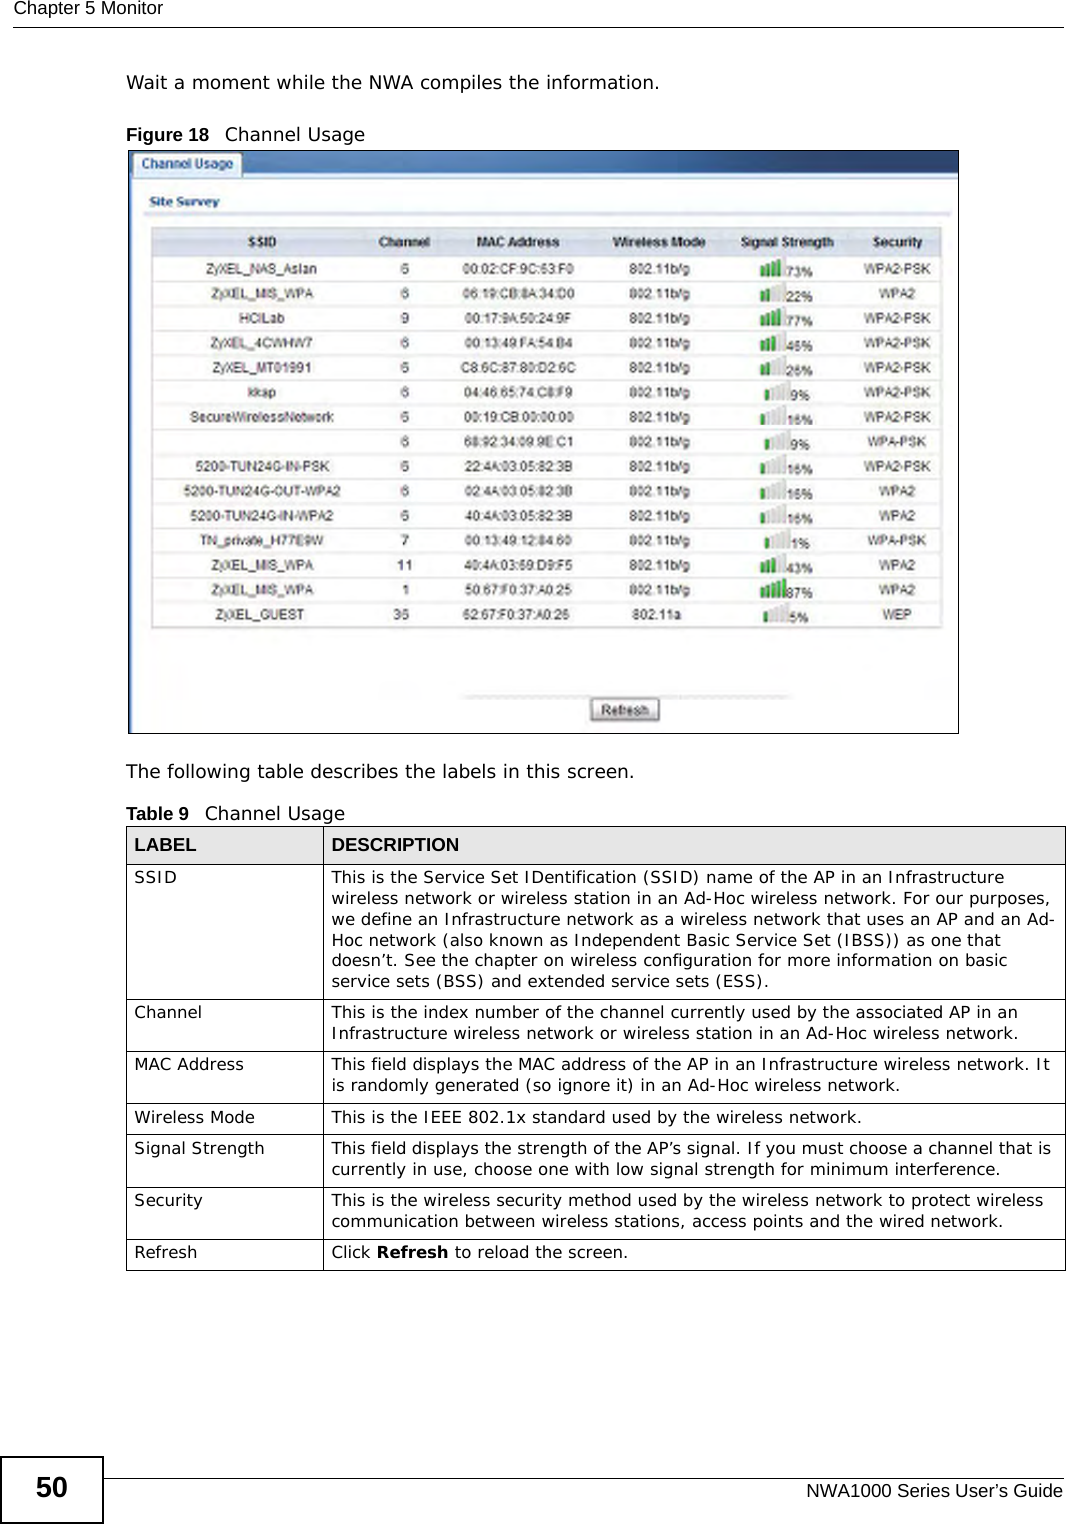 Chapter 5 MonitorNWA1000 Series User’s Guide50Wait a moment while the NWA compiles the information.Figure 18   Channel Usage The following table describes the labels in this screen.Table 9   Channel UsageLABEL DESCRIPTIONSSID This is the Service Set IDentification (SSID) name of the AP in an Infrastructure wireless network or wireless station in an Ad-Hoc wireless network. For our purposes, we define an Infrastructure network as a wireless network that uses an AP and an Ad-Hoc network (also known as Independent Basic Service Set (IBSS)) as one that doesn’t. See the chapter on wireless configuration for more information on basic service sets (BSS) and extended service sets (ESS).Channel This is the index number of the channel currently used by the associated AP in an Infrastructure wireless network or wireless station in an Ad-Hoc wireless network.MAC Address This field displays the MAC address of the AP in an Infrastructure wireless network. It is randomly generated (so ignore it) in an Ad-Hoc wireless network.Wireless Mode This is the IEEE 802.1x standard used by the wireless network.Signal Strength This field displays the strength of the AP’s signal. If you must choose a channel that is currently in use, choose one with low signal strength for minimum interference.Security This is the wireless security method used by the wireless network to protect wireless communication between wireless stations, access points and the wired network.Refresh Click Refresh to reload the screen.